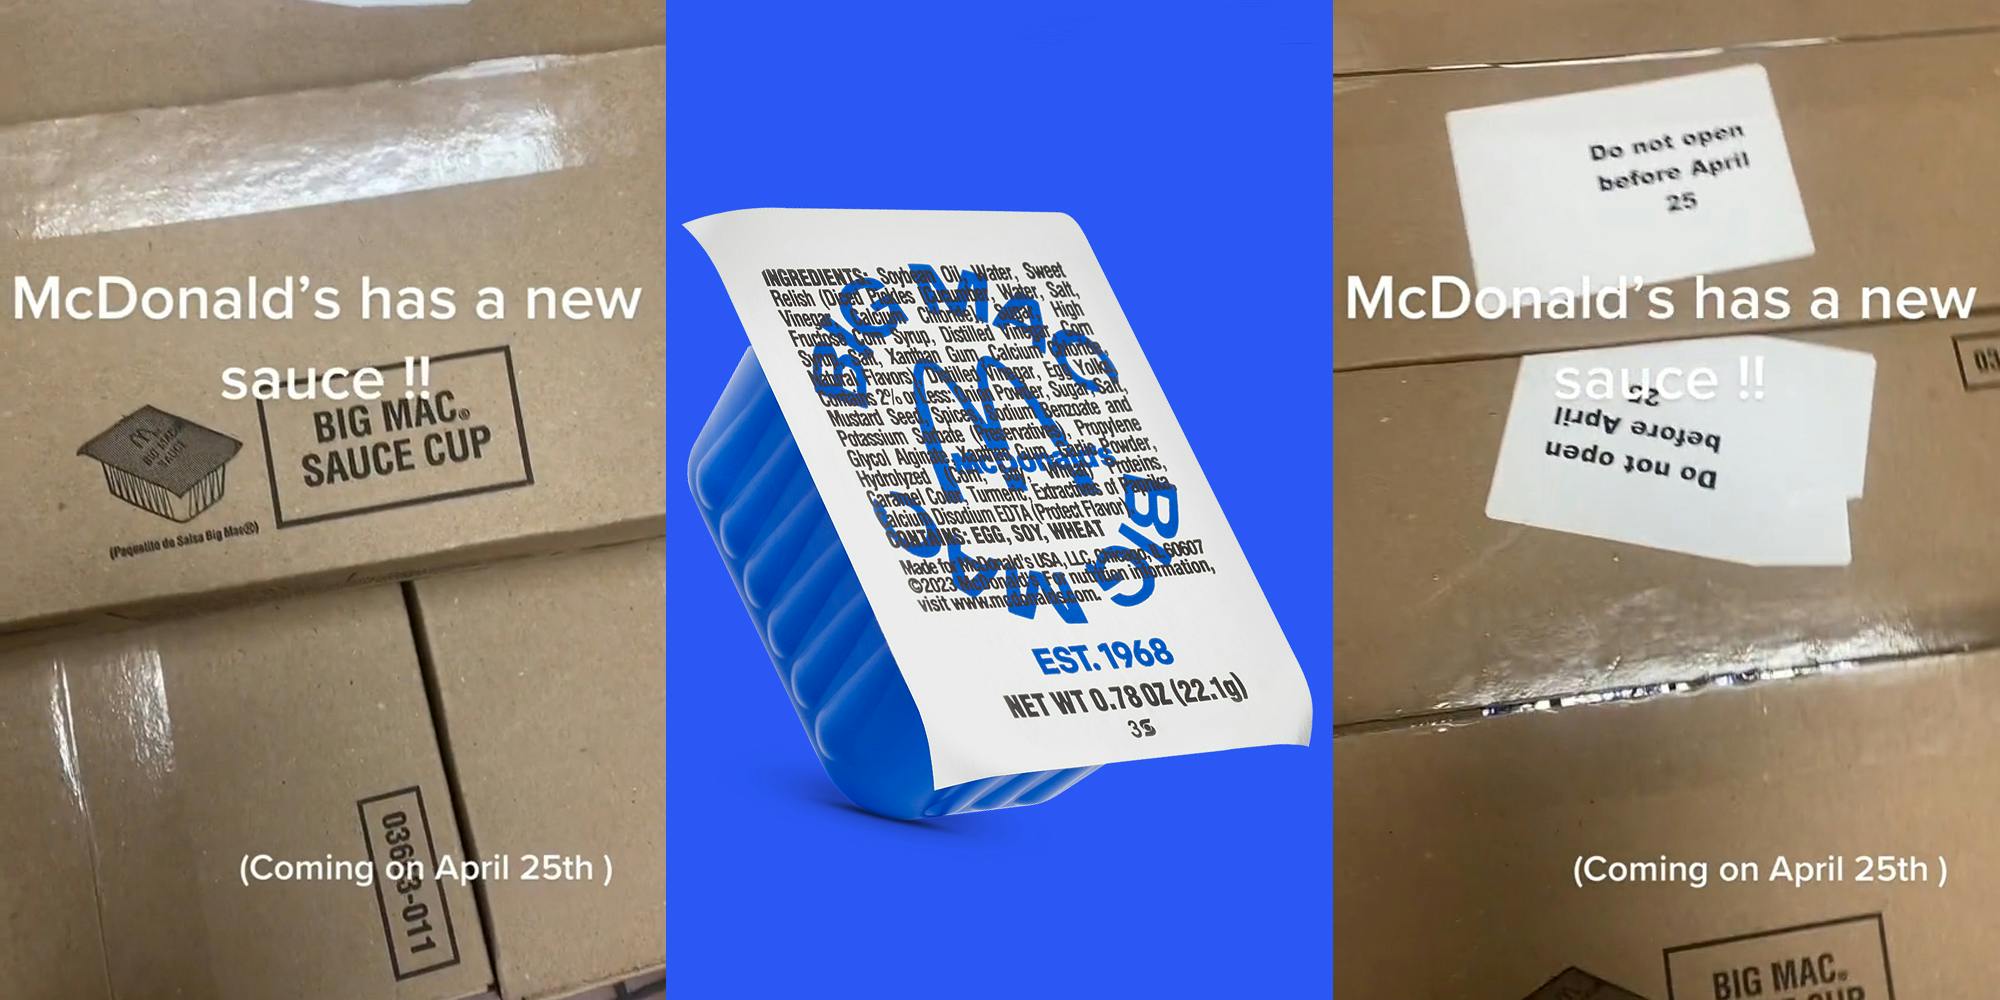 McDonald's box of Big Mac sauce with caption "McDonald's has a new sauce!! (Coming on April 25th)" (l) Big Mac sauce in container in front of blue background (c) McDonald's box of Big Mac sauce with Do not open before April 25 stickers with caption "McDonald's has a new sauce!! (Coming on April 25th)" (r)